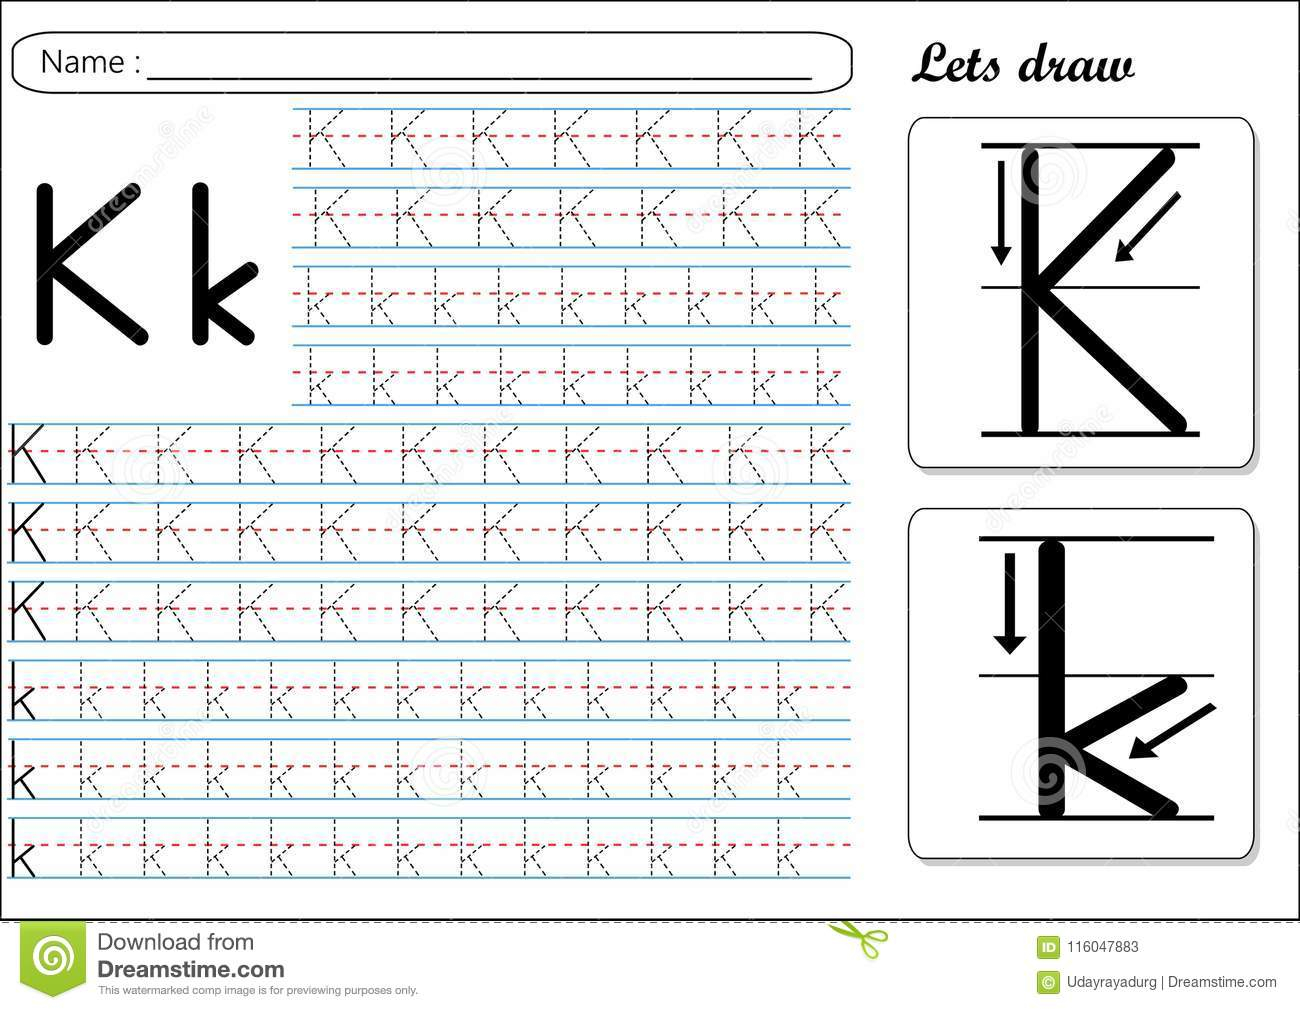 Tracing Worksheet -Kk Stock Vector. Illustration Of Learn throughout Letter K Tracing Sheet